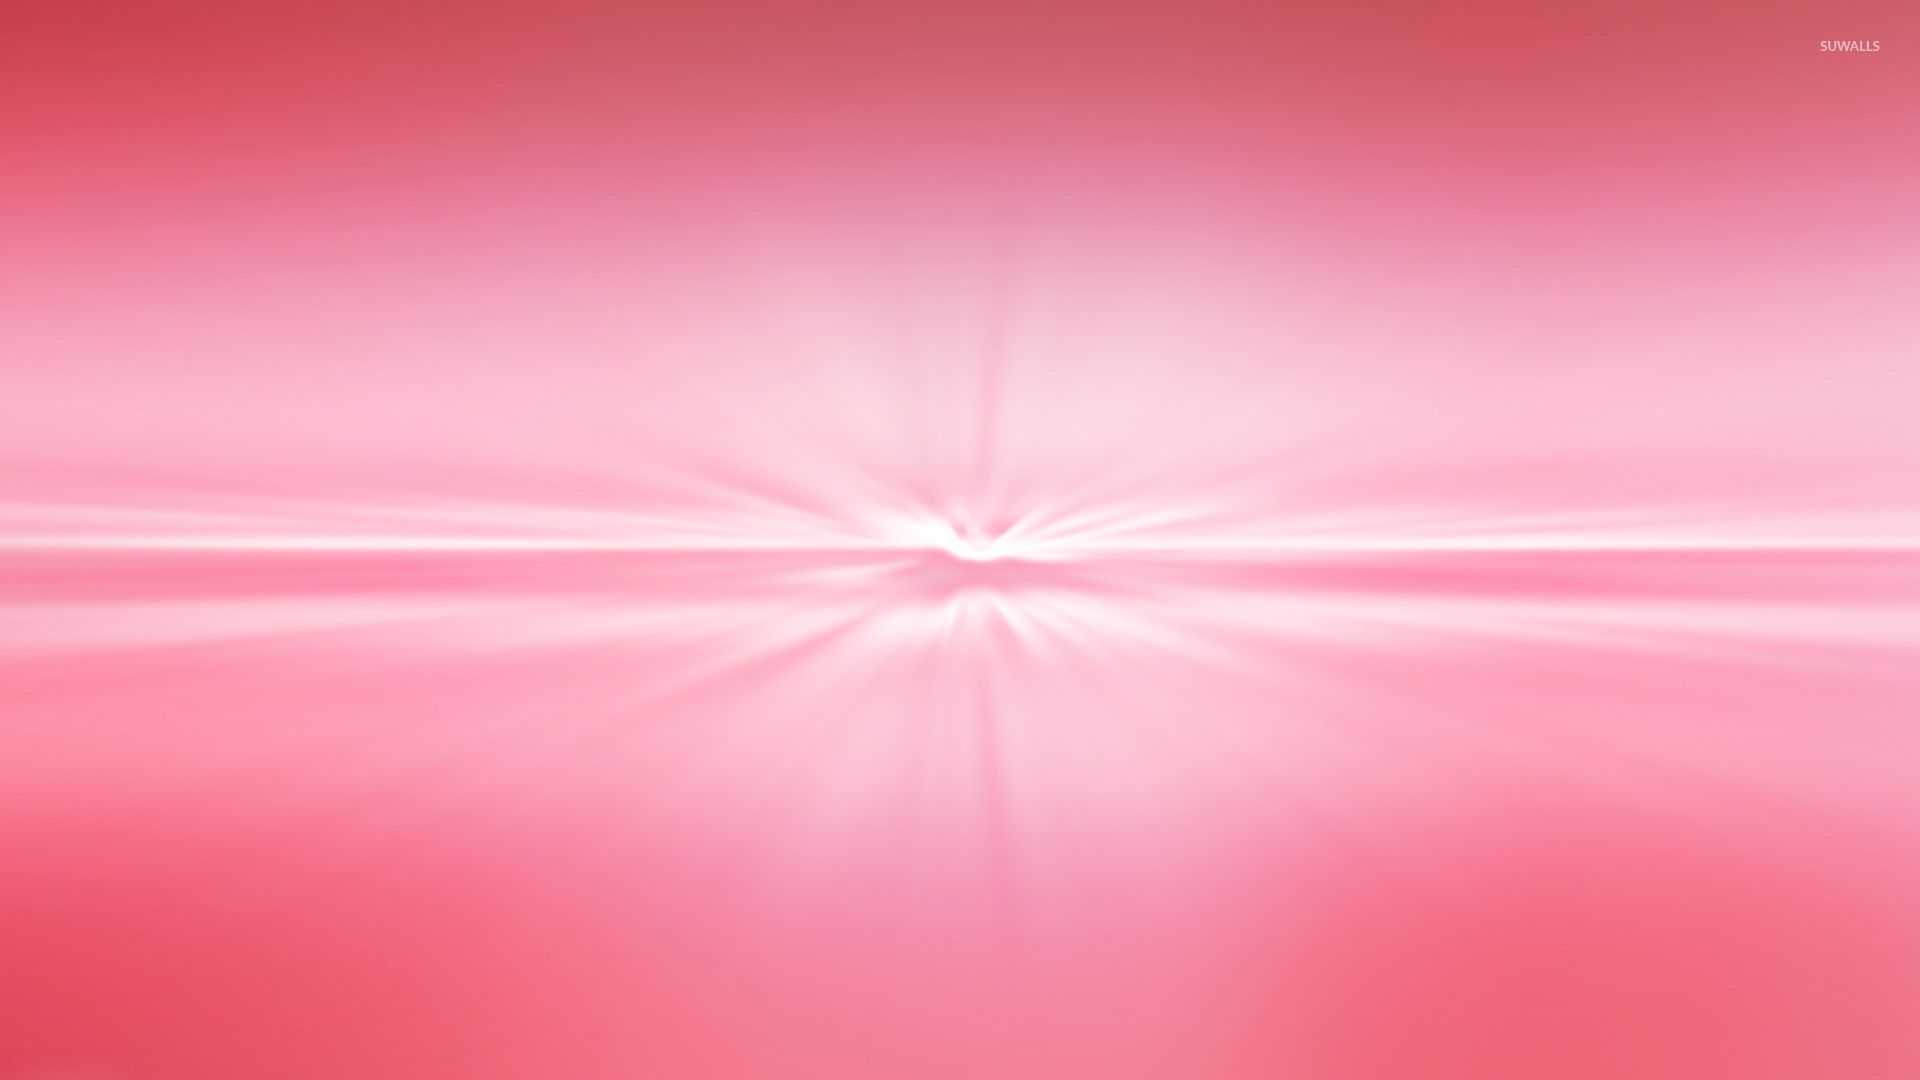 Pink And White Curve Abstract - HD Wallpaper 